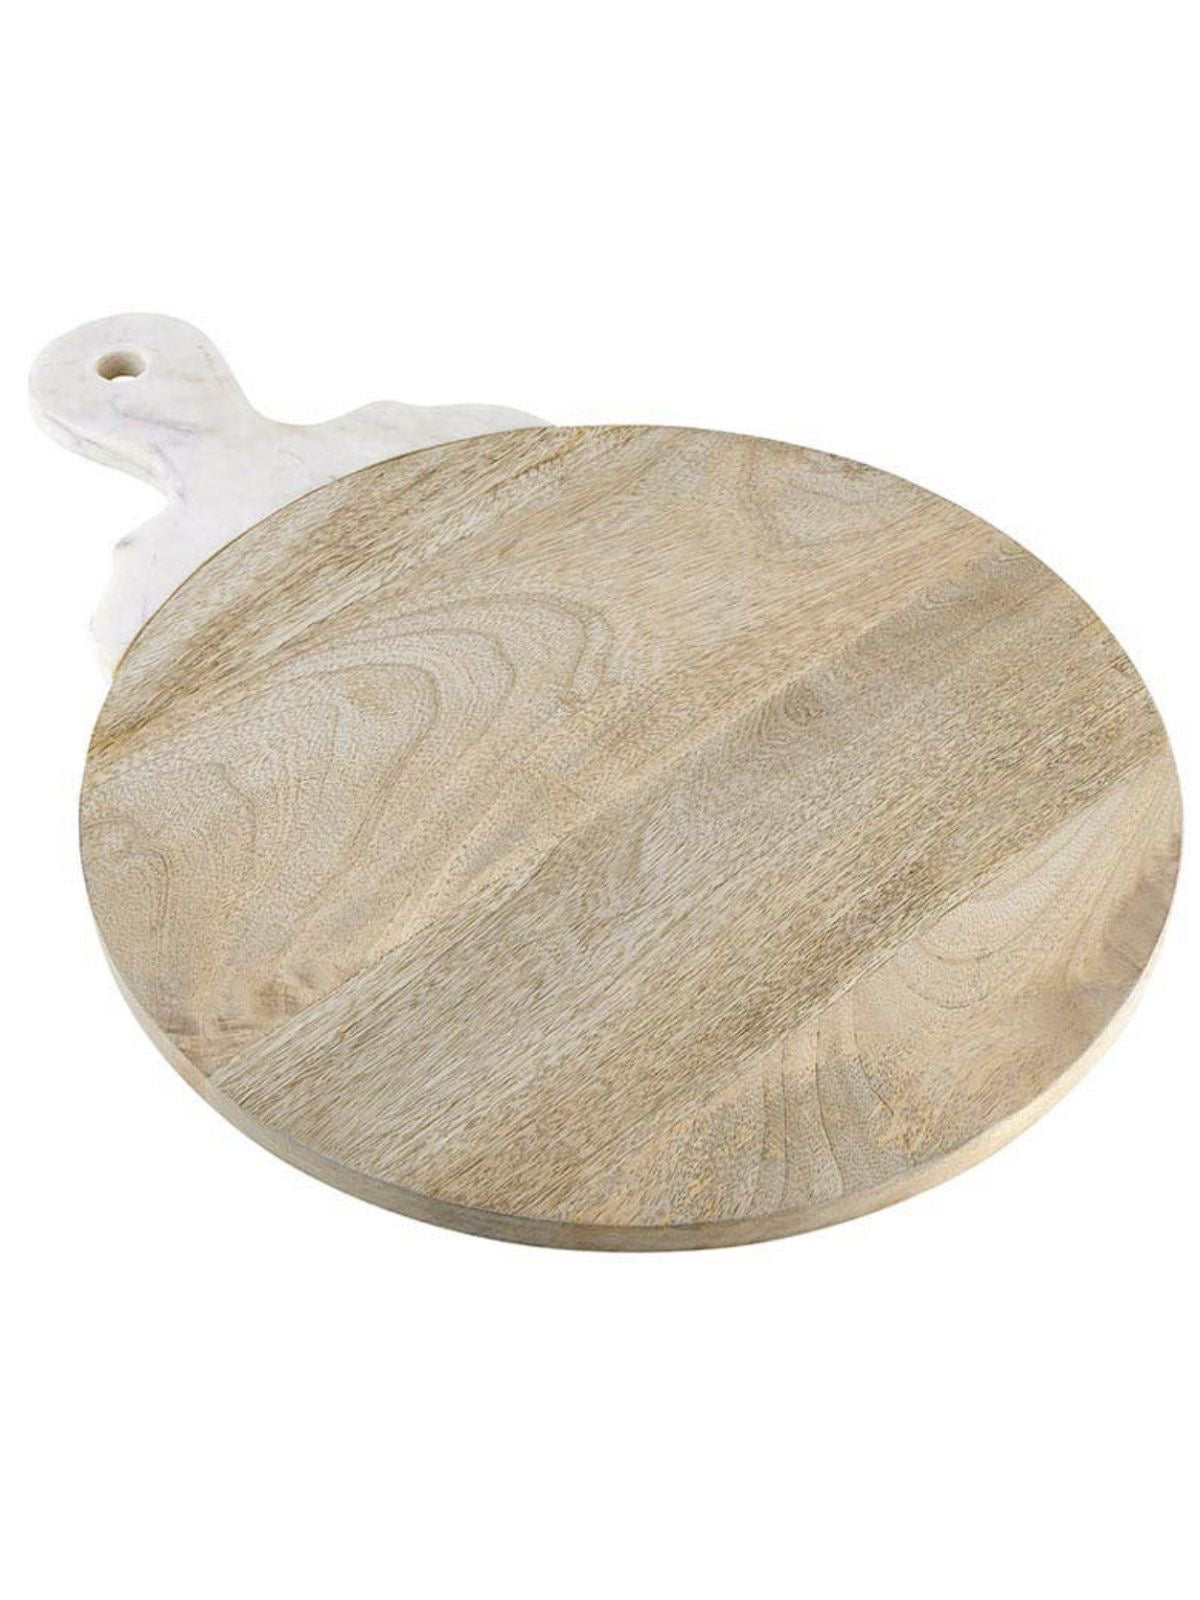 Round Wood Cheese Board with White Carved Marble Handle Sold by KYA Home Decor.